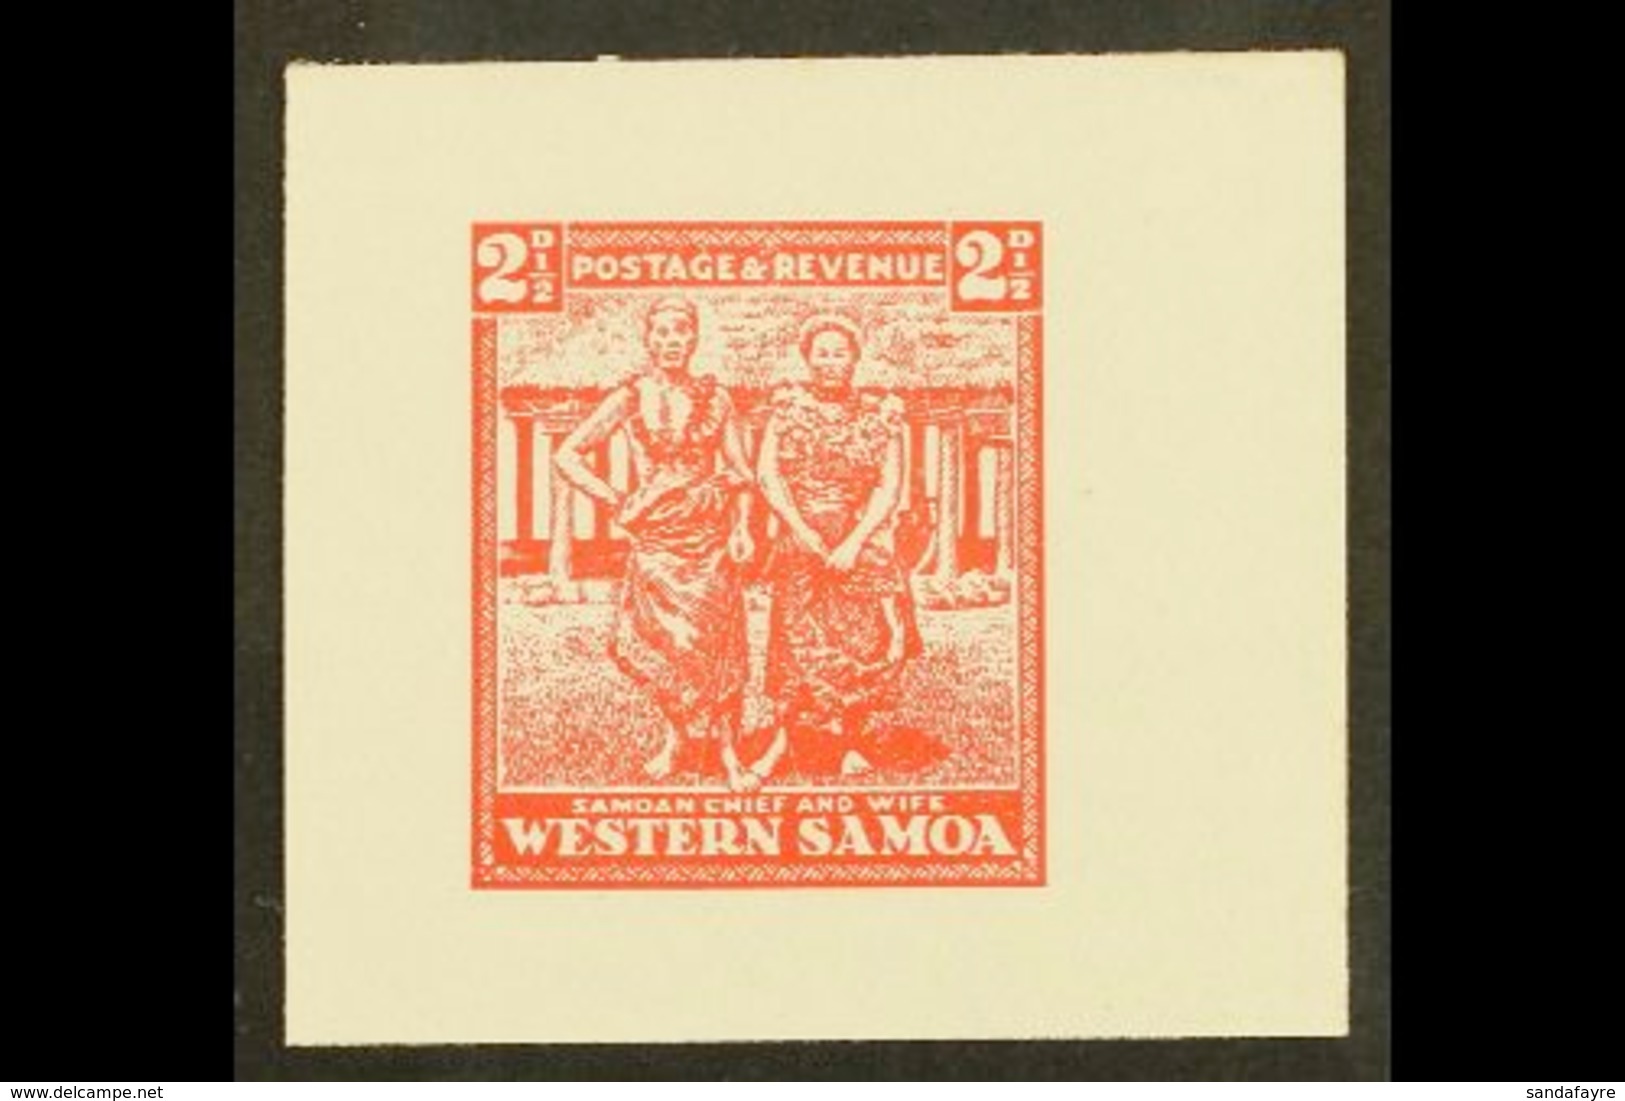 1935 PICTORIAL DEFINITIVE ESSAY Collins Essay For The 2½d Value In Red On Thick White Paper, The "Chief And Wife" Design - Samoa